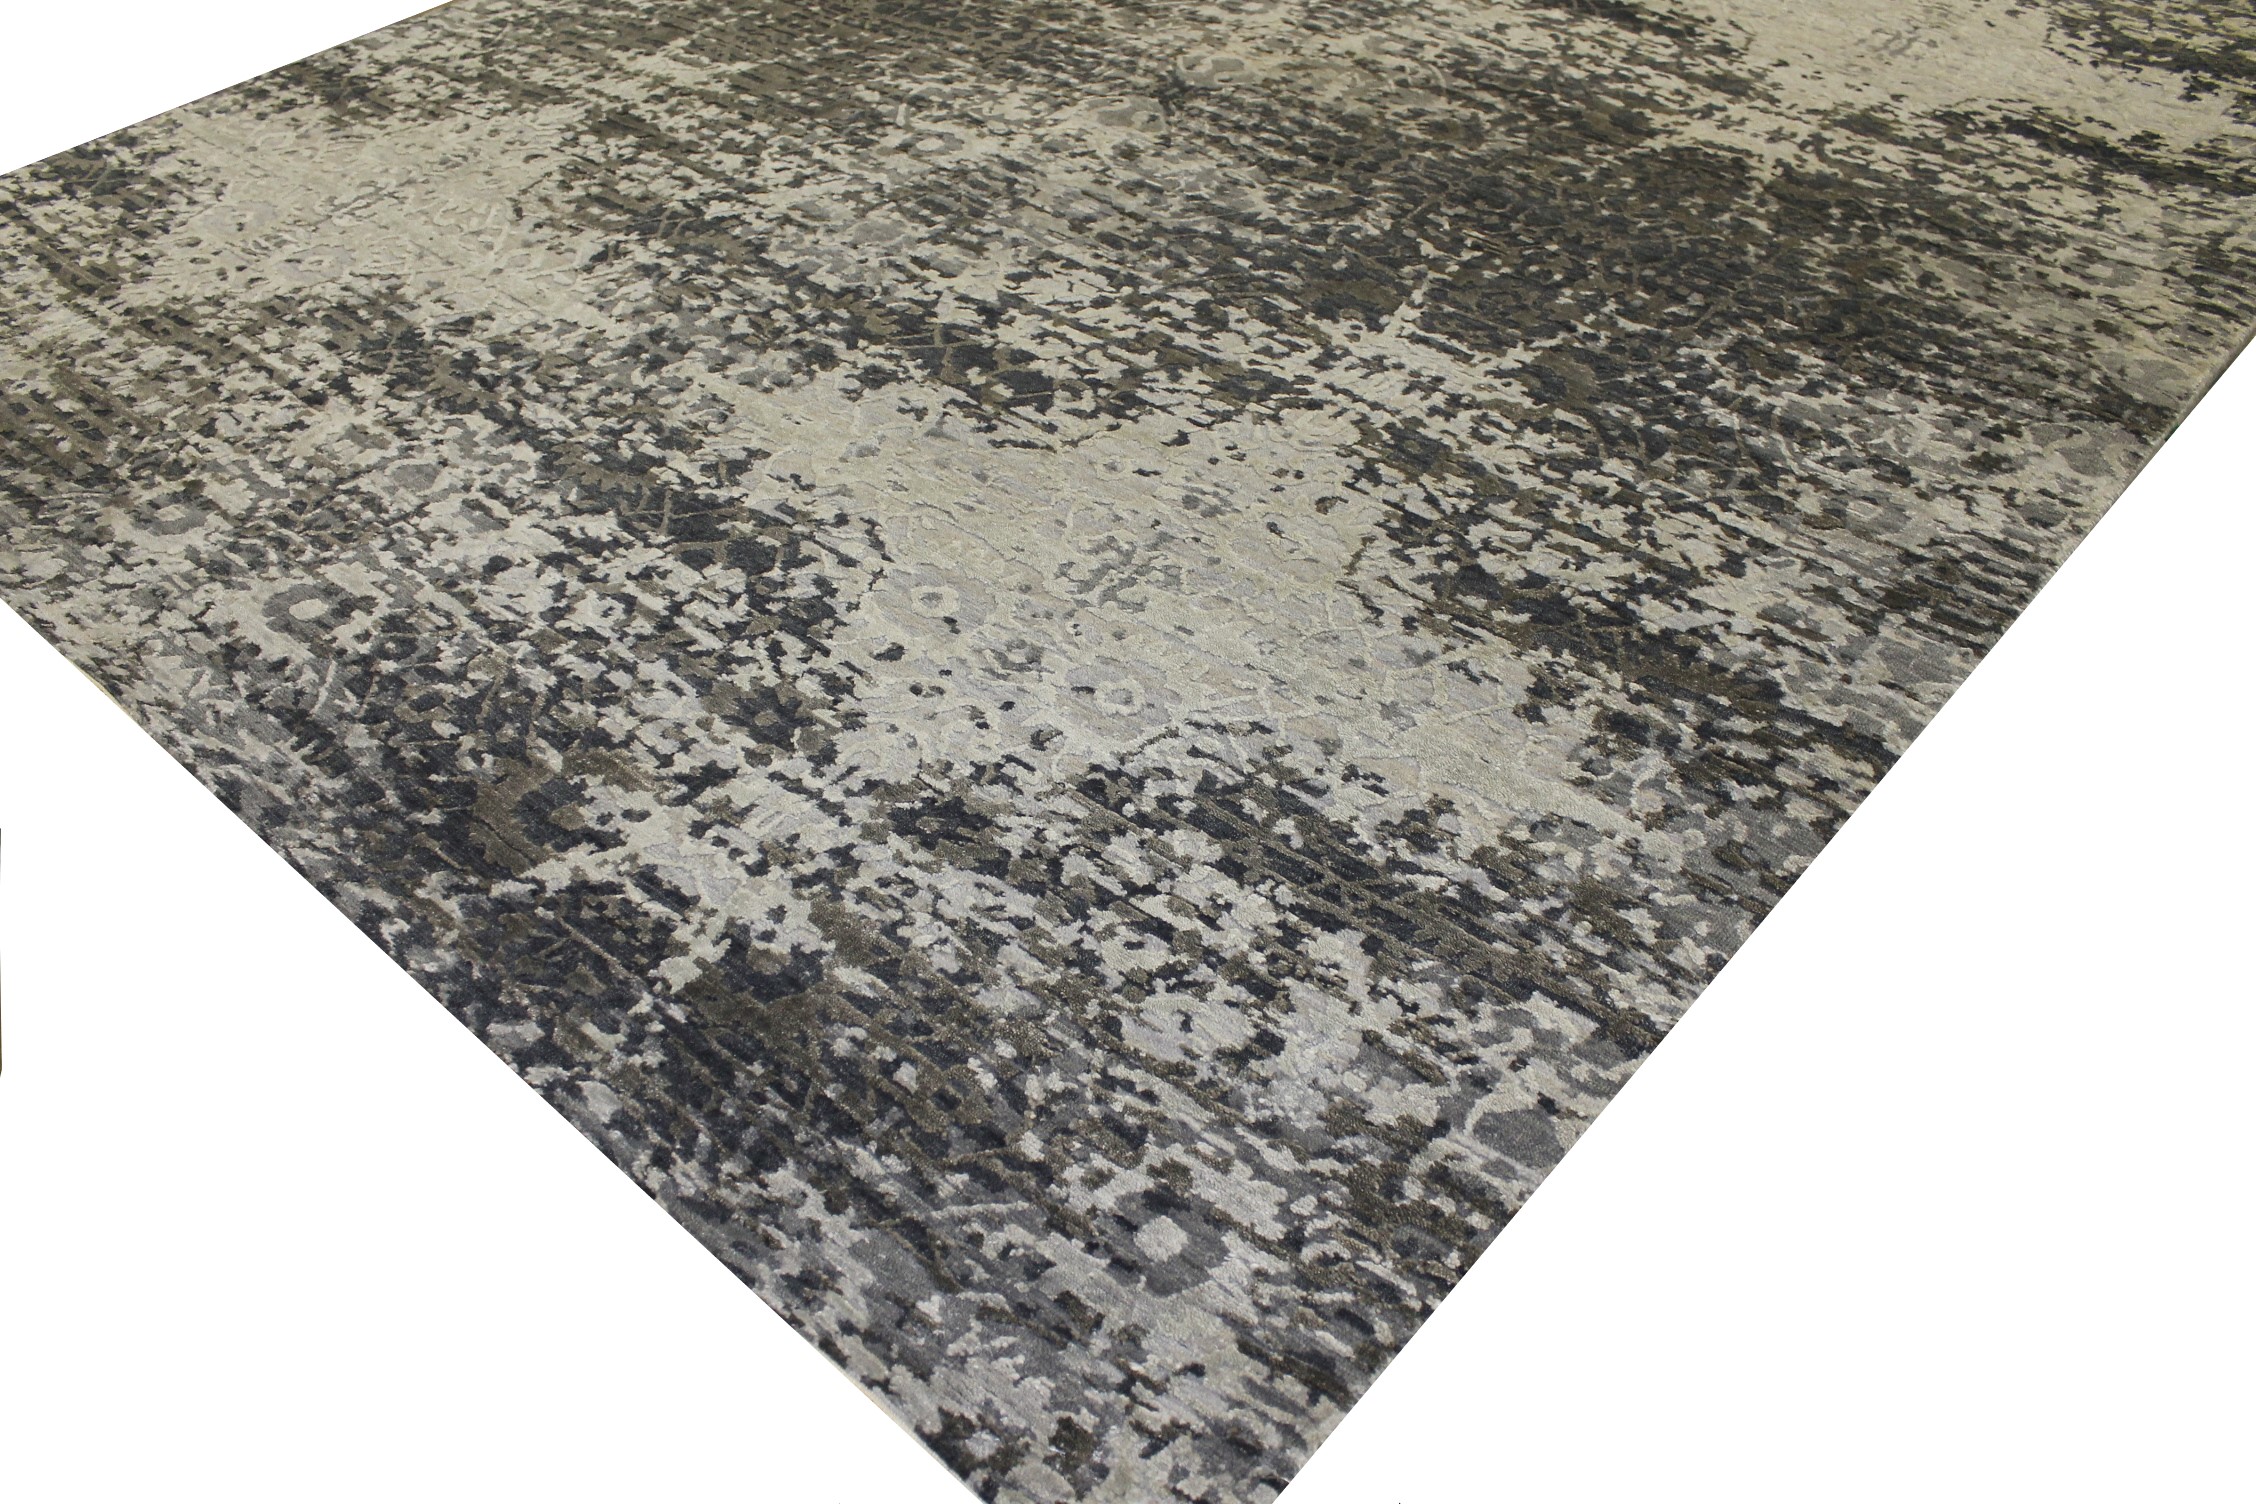 Contemporary & Modern Rugs Splash 022694 Black - Charcoal & Lt. Grey - Grey Hand Knotted Rug